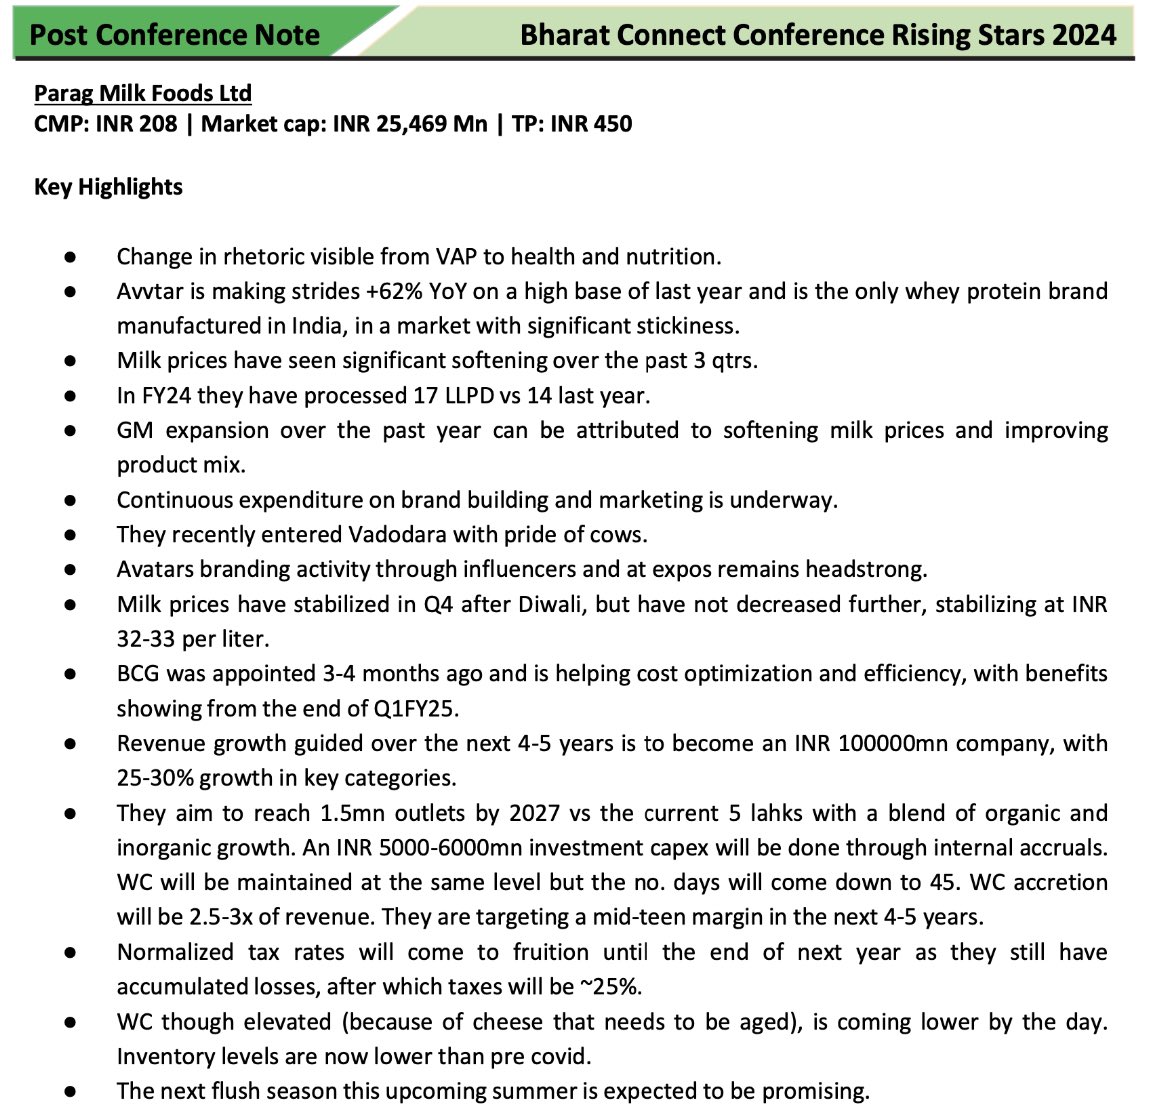 A week back, Arihant Capital had initiated a buy rating on PARAG MILK FOODS with the target price of 450, after the the Bharat Connect Conference Rising Stars 2024. 
As against the current price of 211

Current Market Cap 2528 CR 
TTM Sales of 3150 CR with 6% margins 
Guided for…